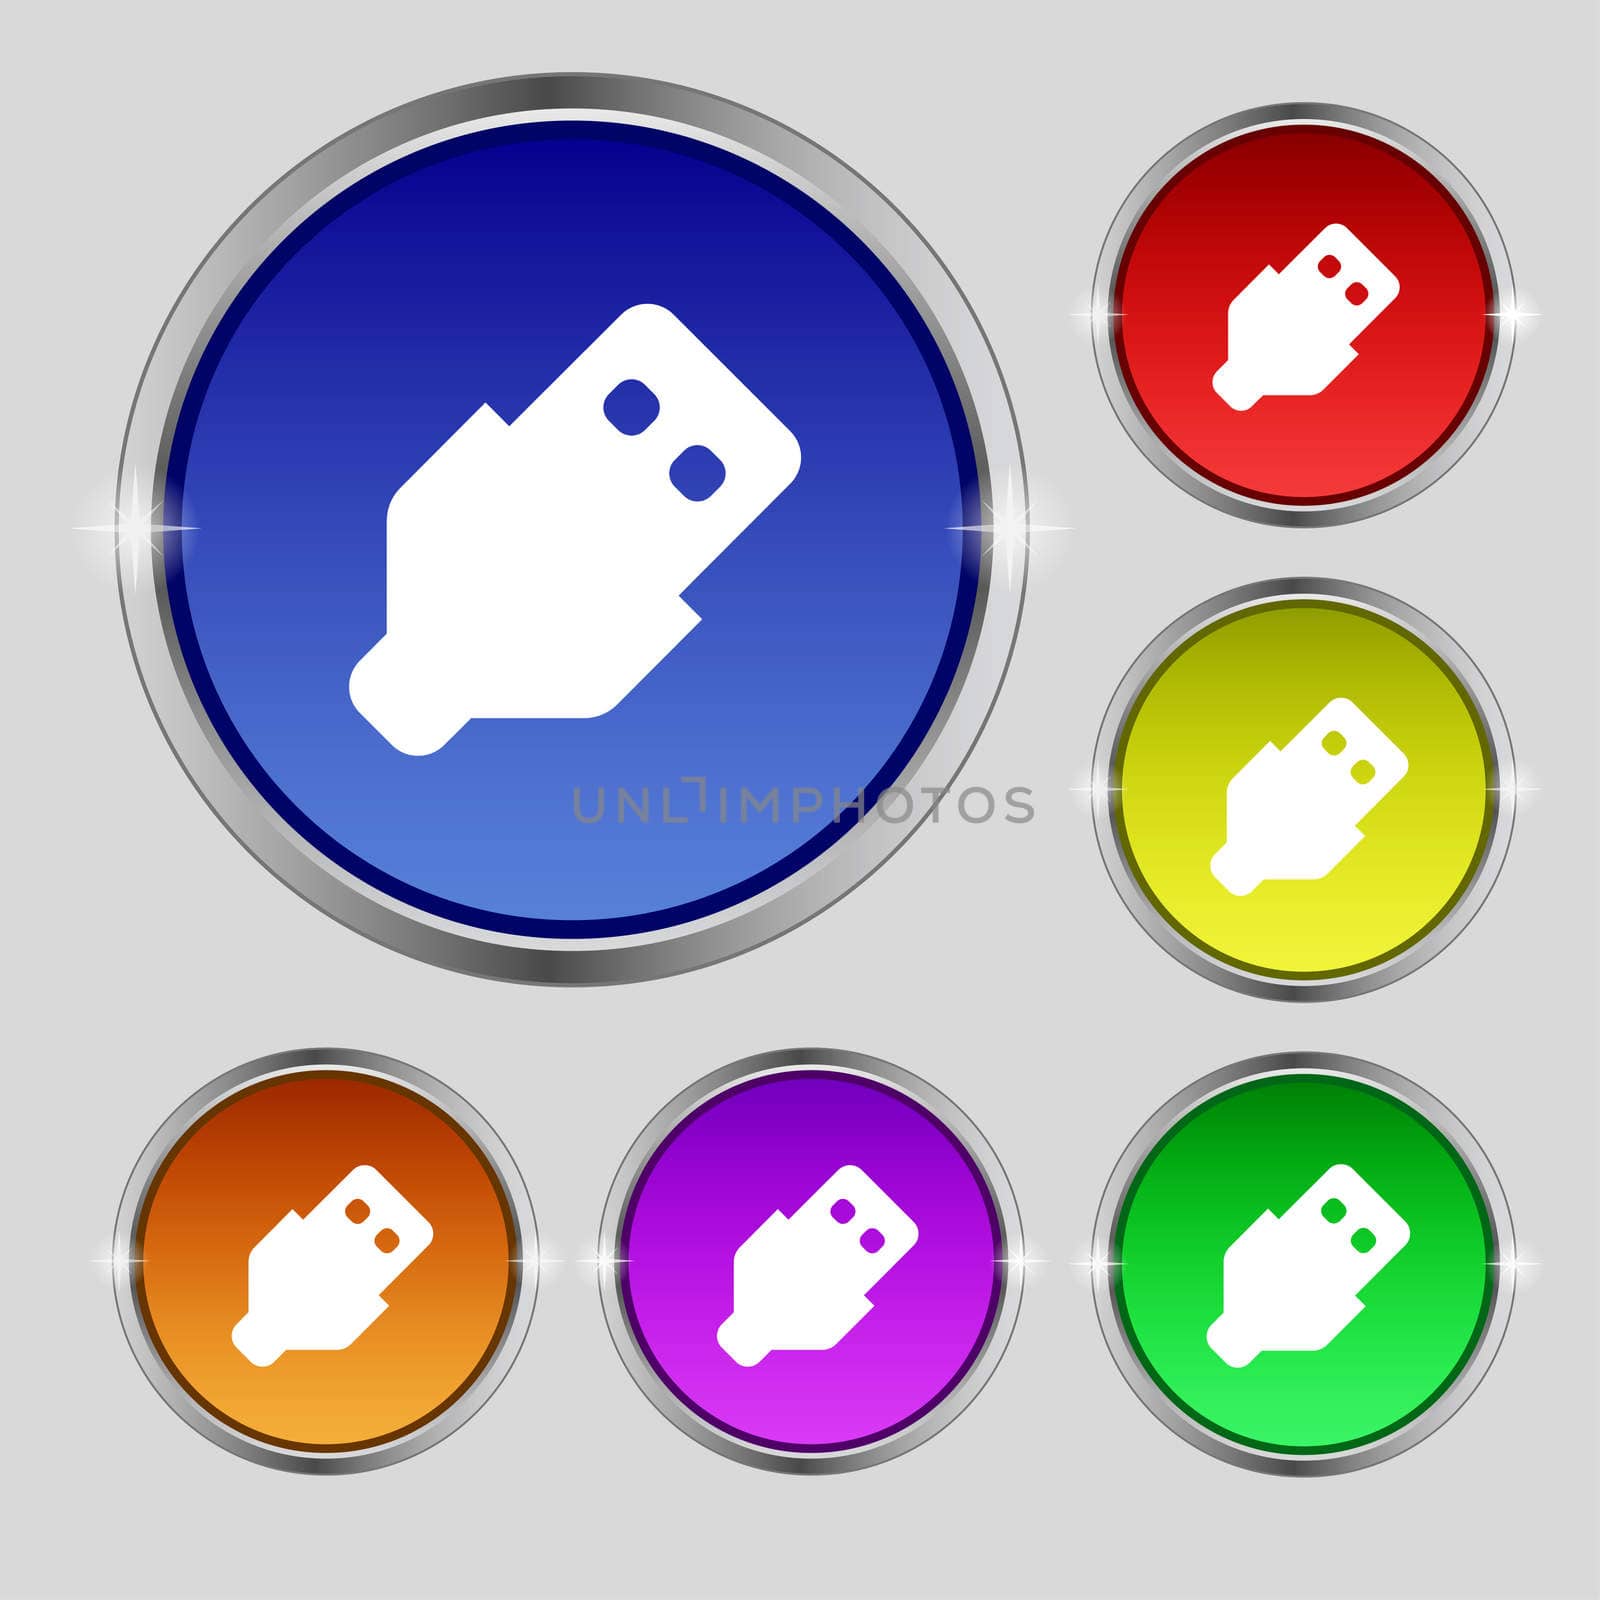 USB icon sign. Round symbol on bright colourful buttons. illustration